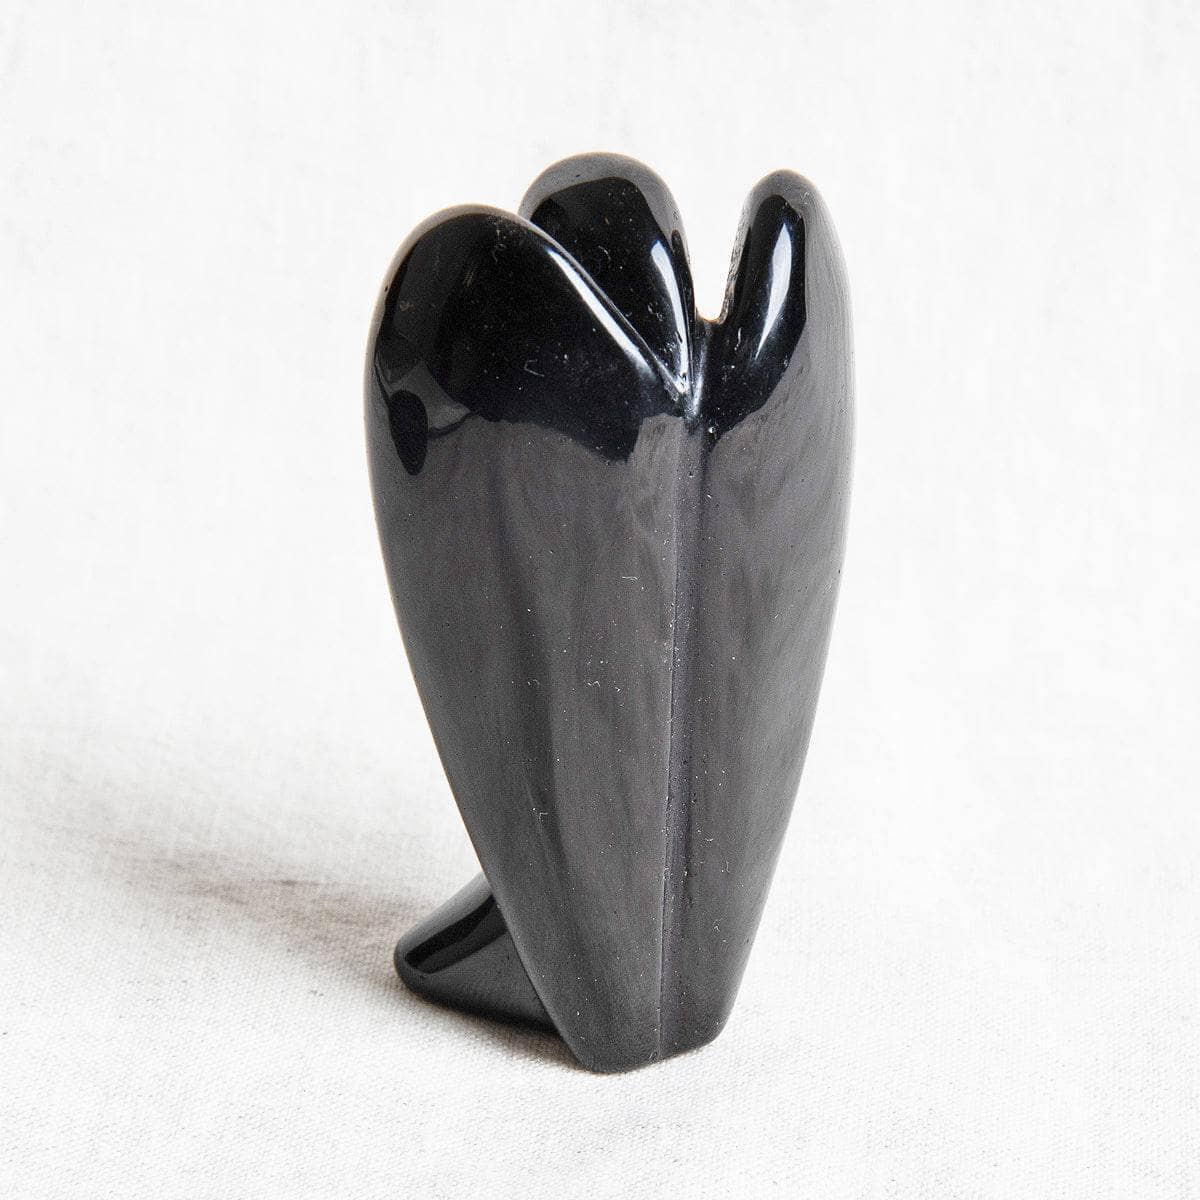 Black Obsidian Angel by Tiny Rituals